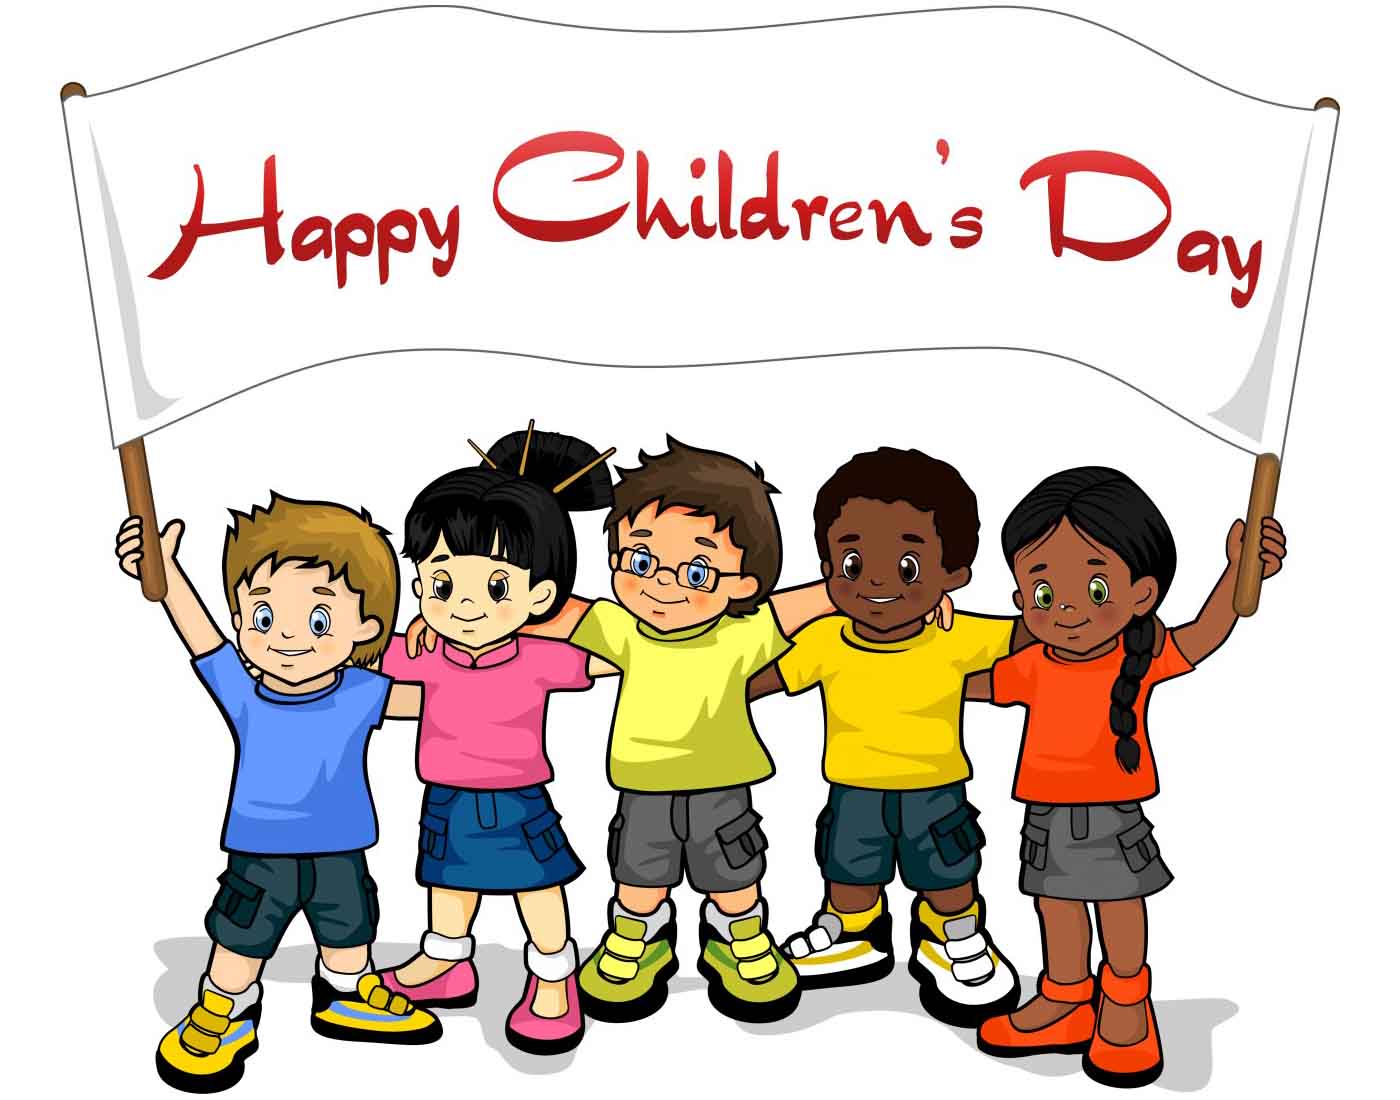 childrens-day-essay-and-speech-in-hindi-english-to-celebrate-the-wonderful-occasion-4